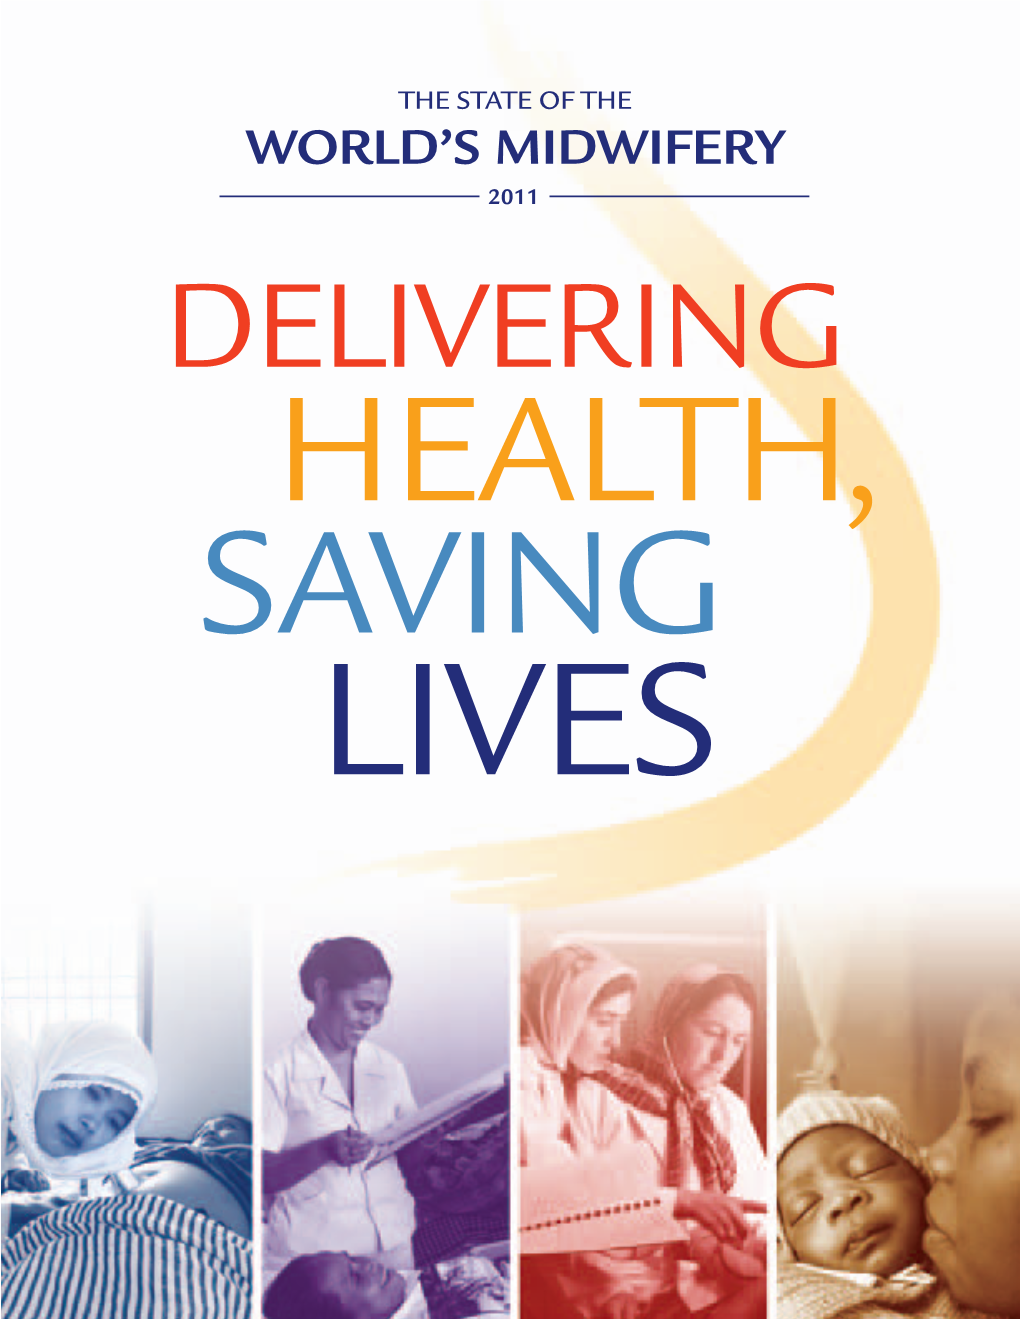 World's Midwifery Country Survey Respondents